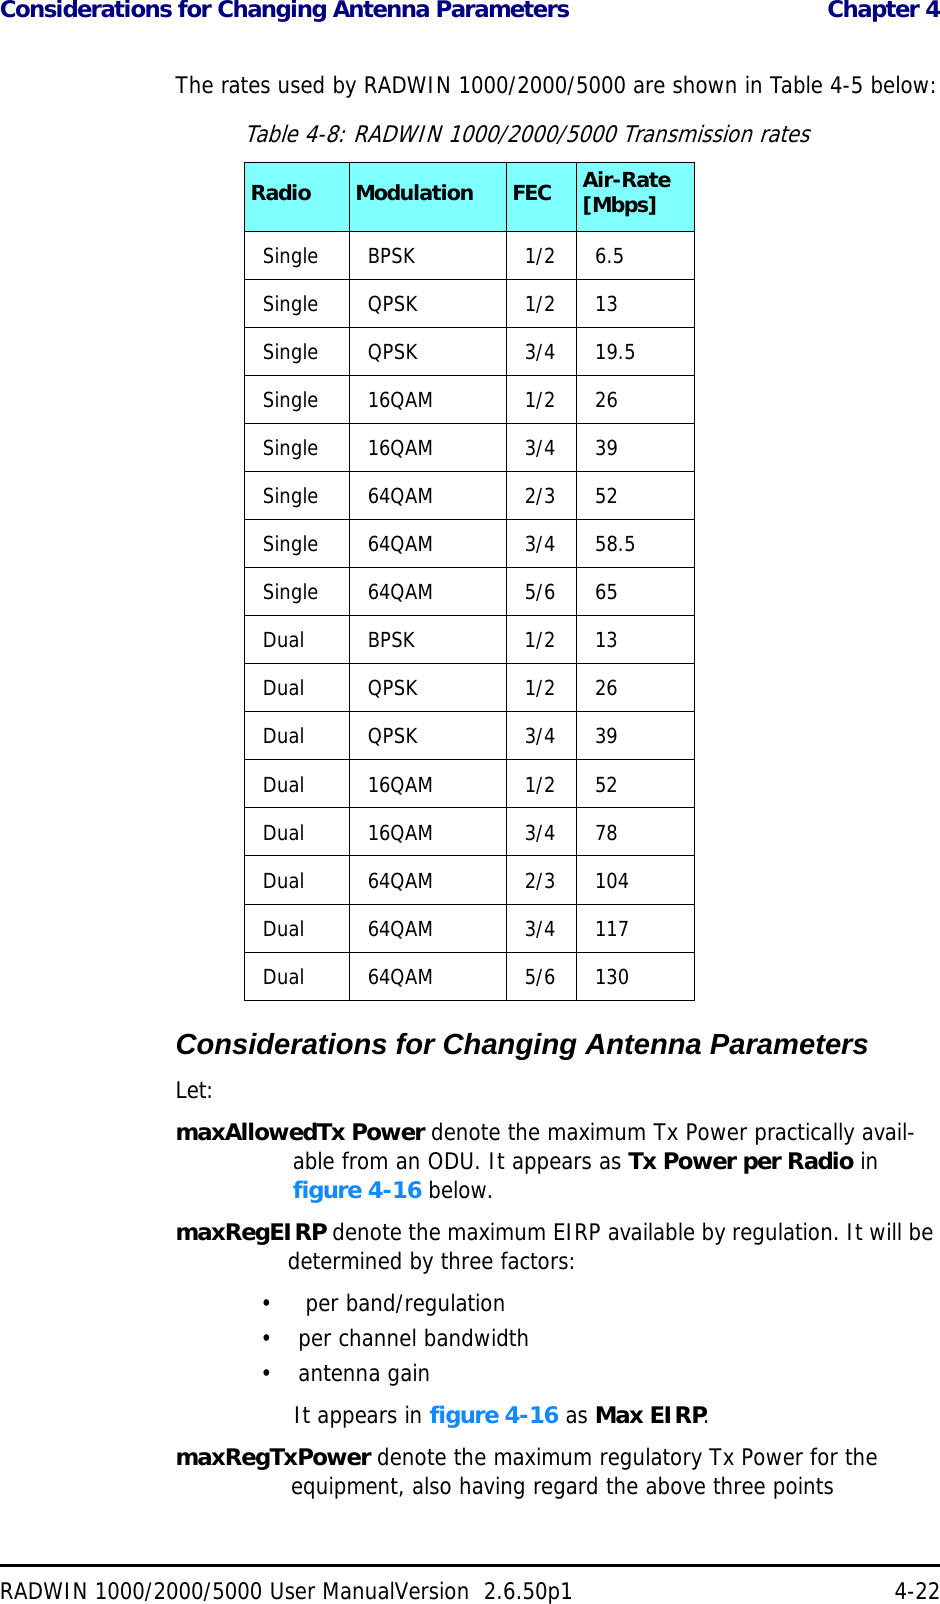 Considerations for Changing Antenna Parameters  Chapter 4RADWIN 1000/2000/5000 User ManualVersion  2.6.50p1 4-22The rates used by RADWIN 1000/2000/5000 are shown in Table 4-5 below:Considerations for Changing Antenna ParametersLet:maxAllowedTx Power denote the maximum Tx Power practically avail-able from an ODU. It appears as Tx Power per Radio in figure 4-16 below.maxRegEIRP denote the maximum EIRP available by regulation. It will be determined by three factors:•  per band/regulation• per channel bandwidth•antenna gainIt appears in figure 4-16 as Max EIRP.maxRegTxPower denote the maximum regulatory Tx Power for the equipment, also having regard the above three pointsTable 4-8: RADWIN 1000/2000/5000 Transmission ratesRadio Modulation FEC Air-Rate [Mbps]Single BPSK 1/2 6.5Single QPSK 1/2 13Single QPSK 3/4 19.5Single 16QAM 1/2 26Single 16QAM 3/4 39Single 64QAM 2/3 52Single 64QAM 3/4 58.5Single 64QAM 5/6 65Dual BPSK 1/2 13Dual QPSK 1/2 26Dual QPSK 3/4 39Dual 16QAM 1/2 52Dual 16QAM 3/4 78Dual 64QAM 2/3 104Dual 64QAM 3/4 117Dual 64QAM 5/6 130